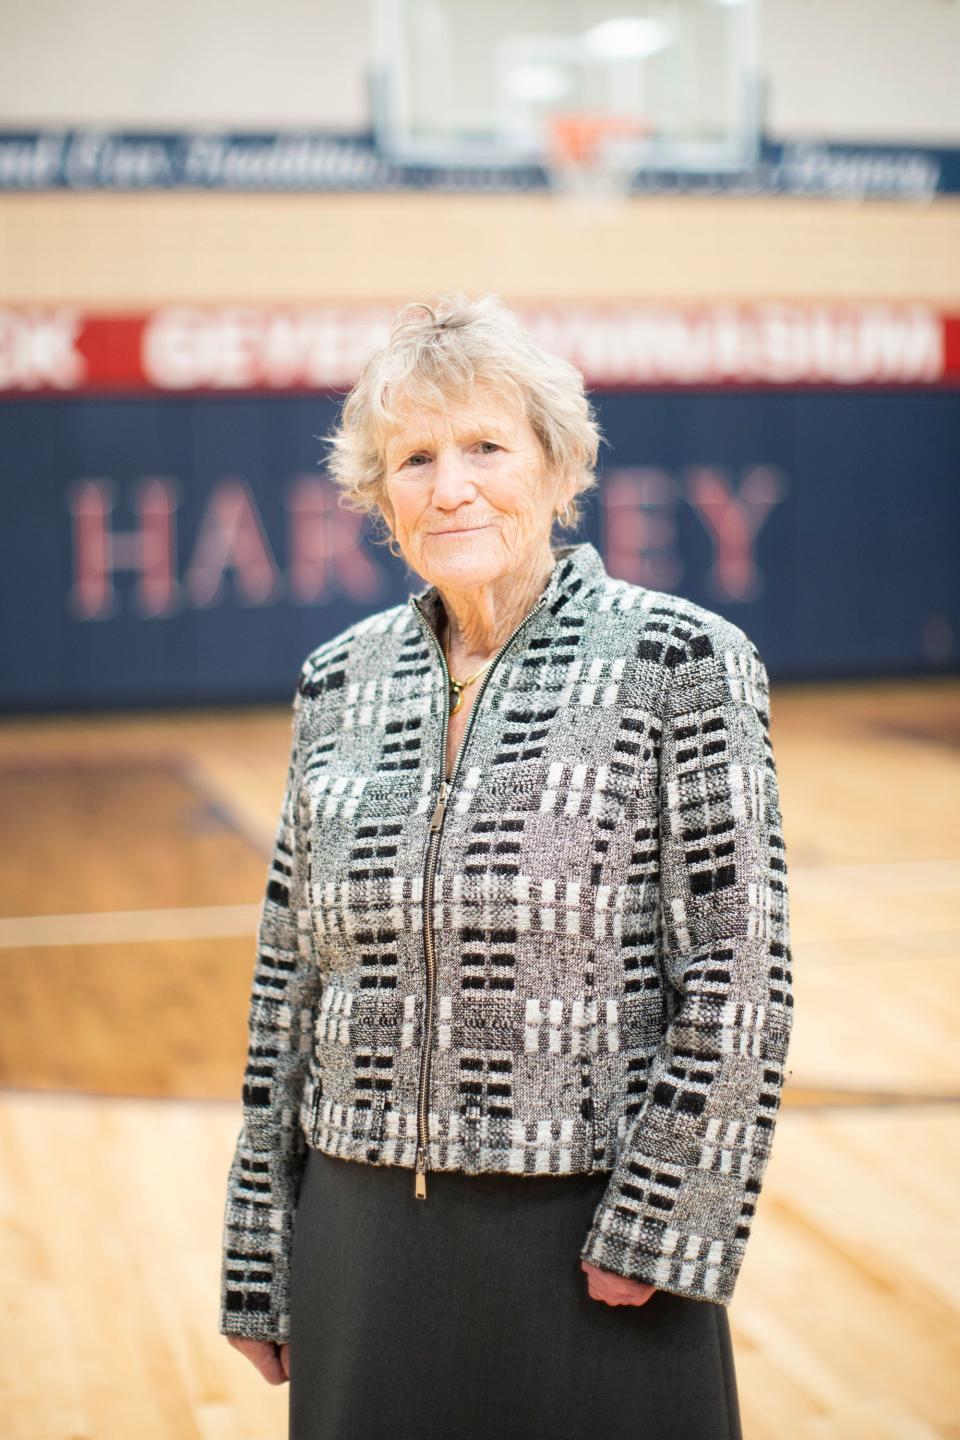 Patty Ryan, 78, is a high school officiating trailblazer. She was the first woman to officiate a boys basketball game in Columbus.